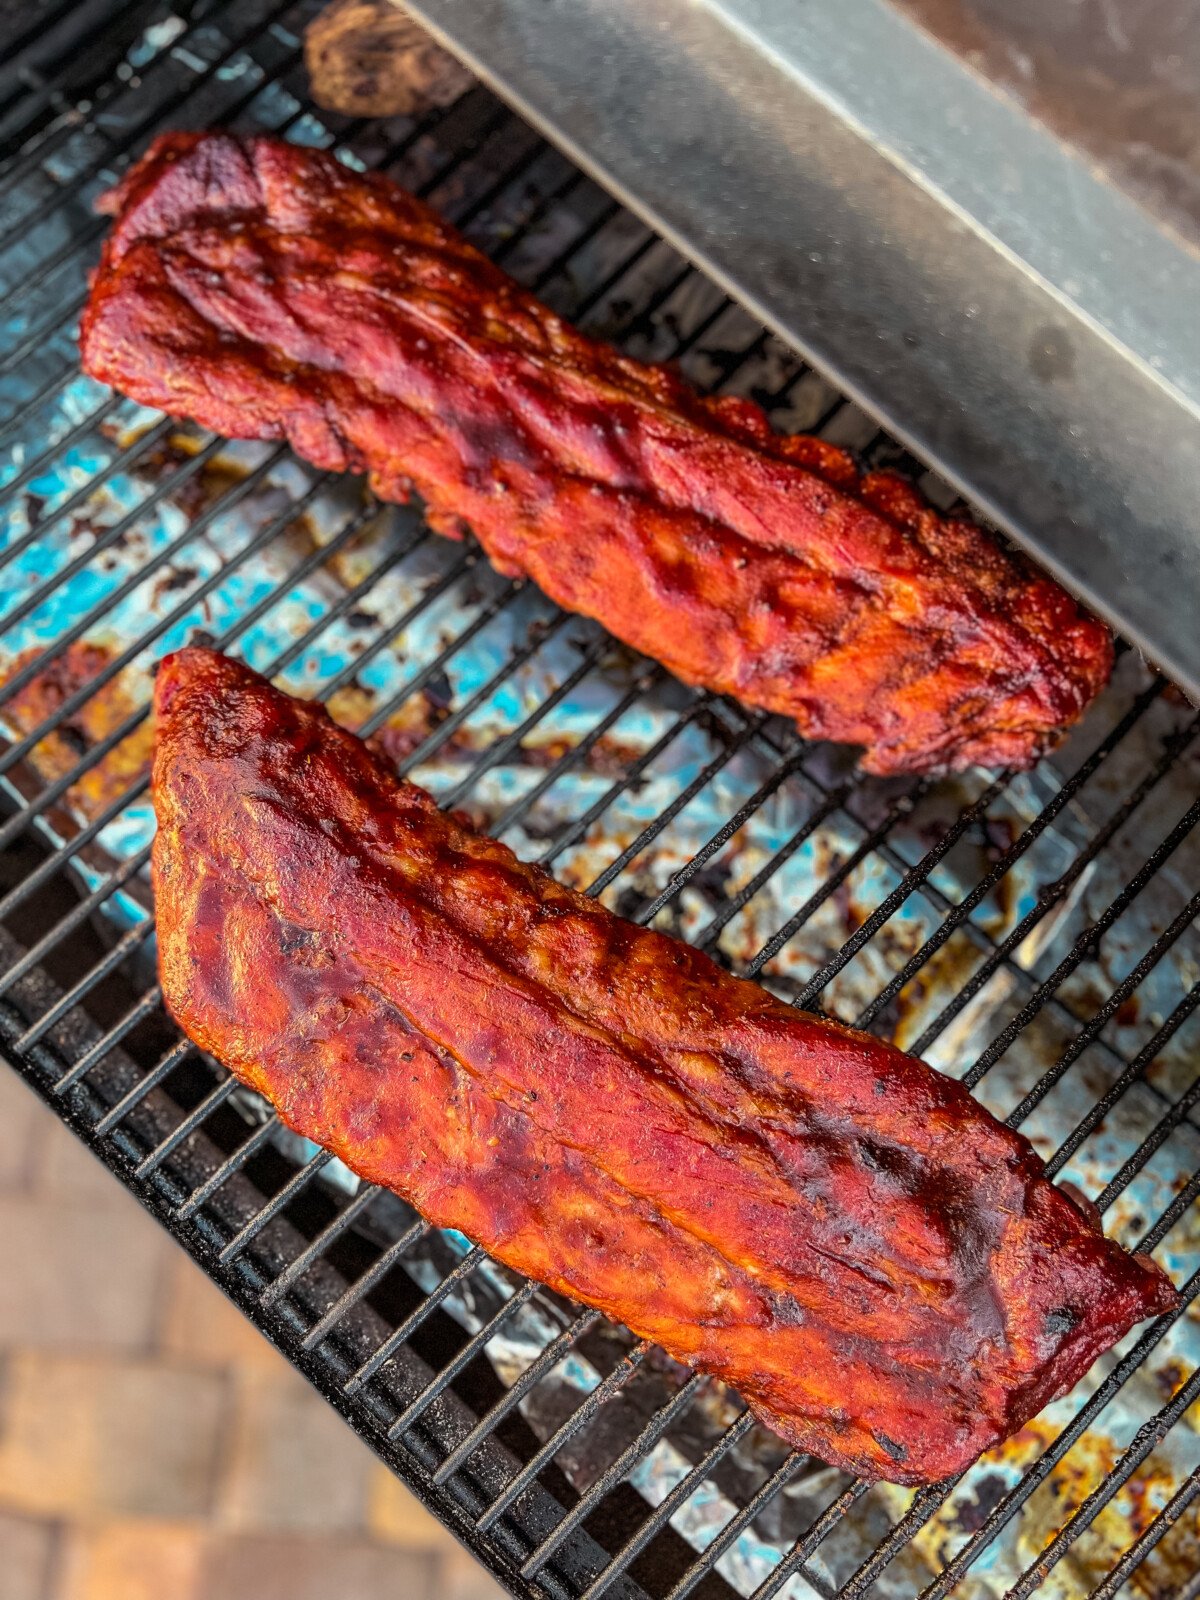 2 racks of ribs brushed with barbecue sauce on a Traeger grill.